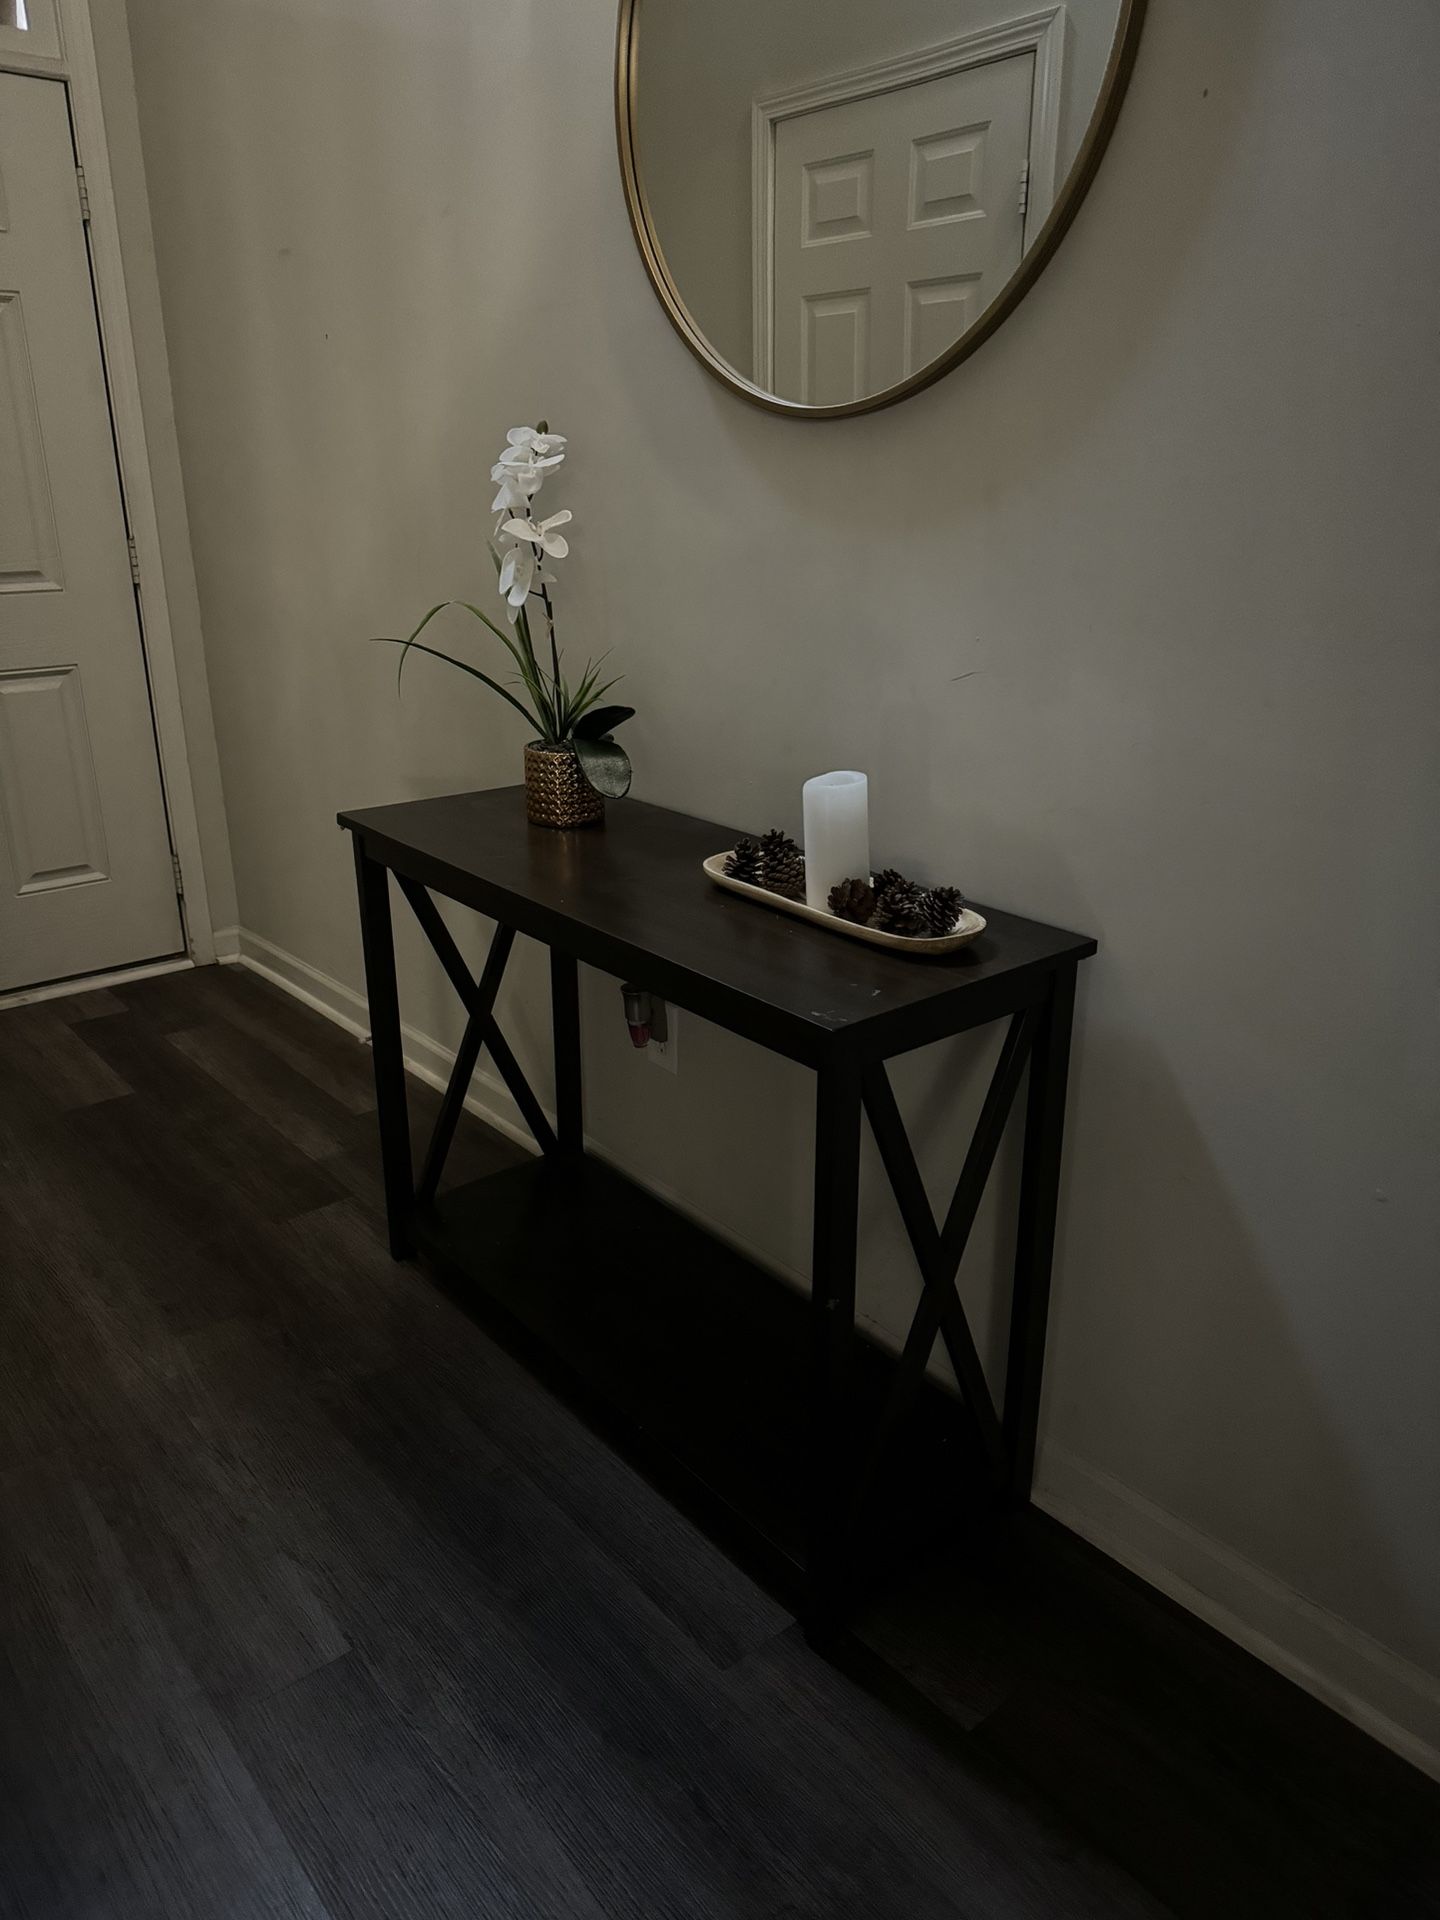 Entry Console Table 